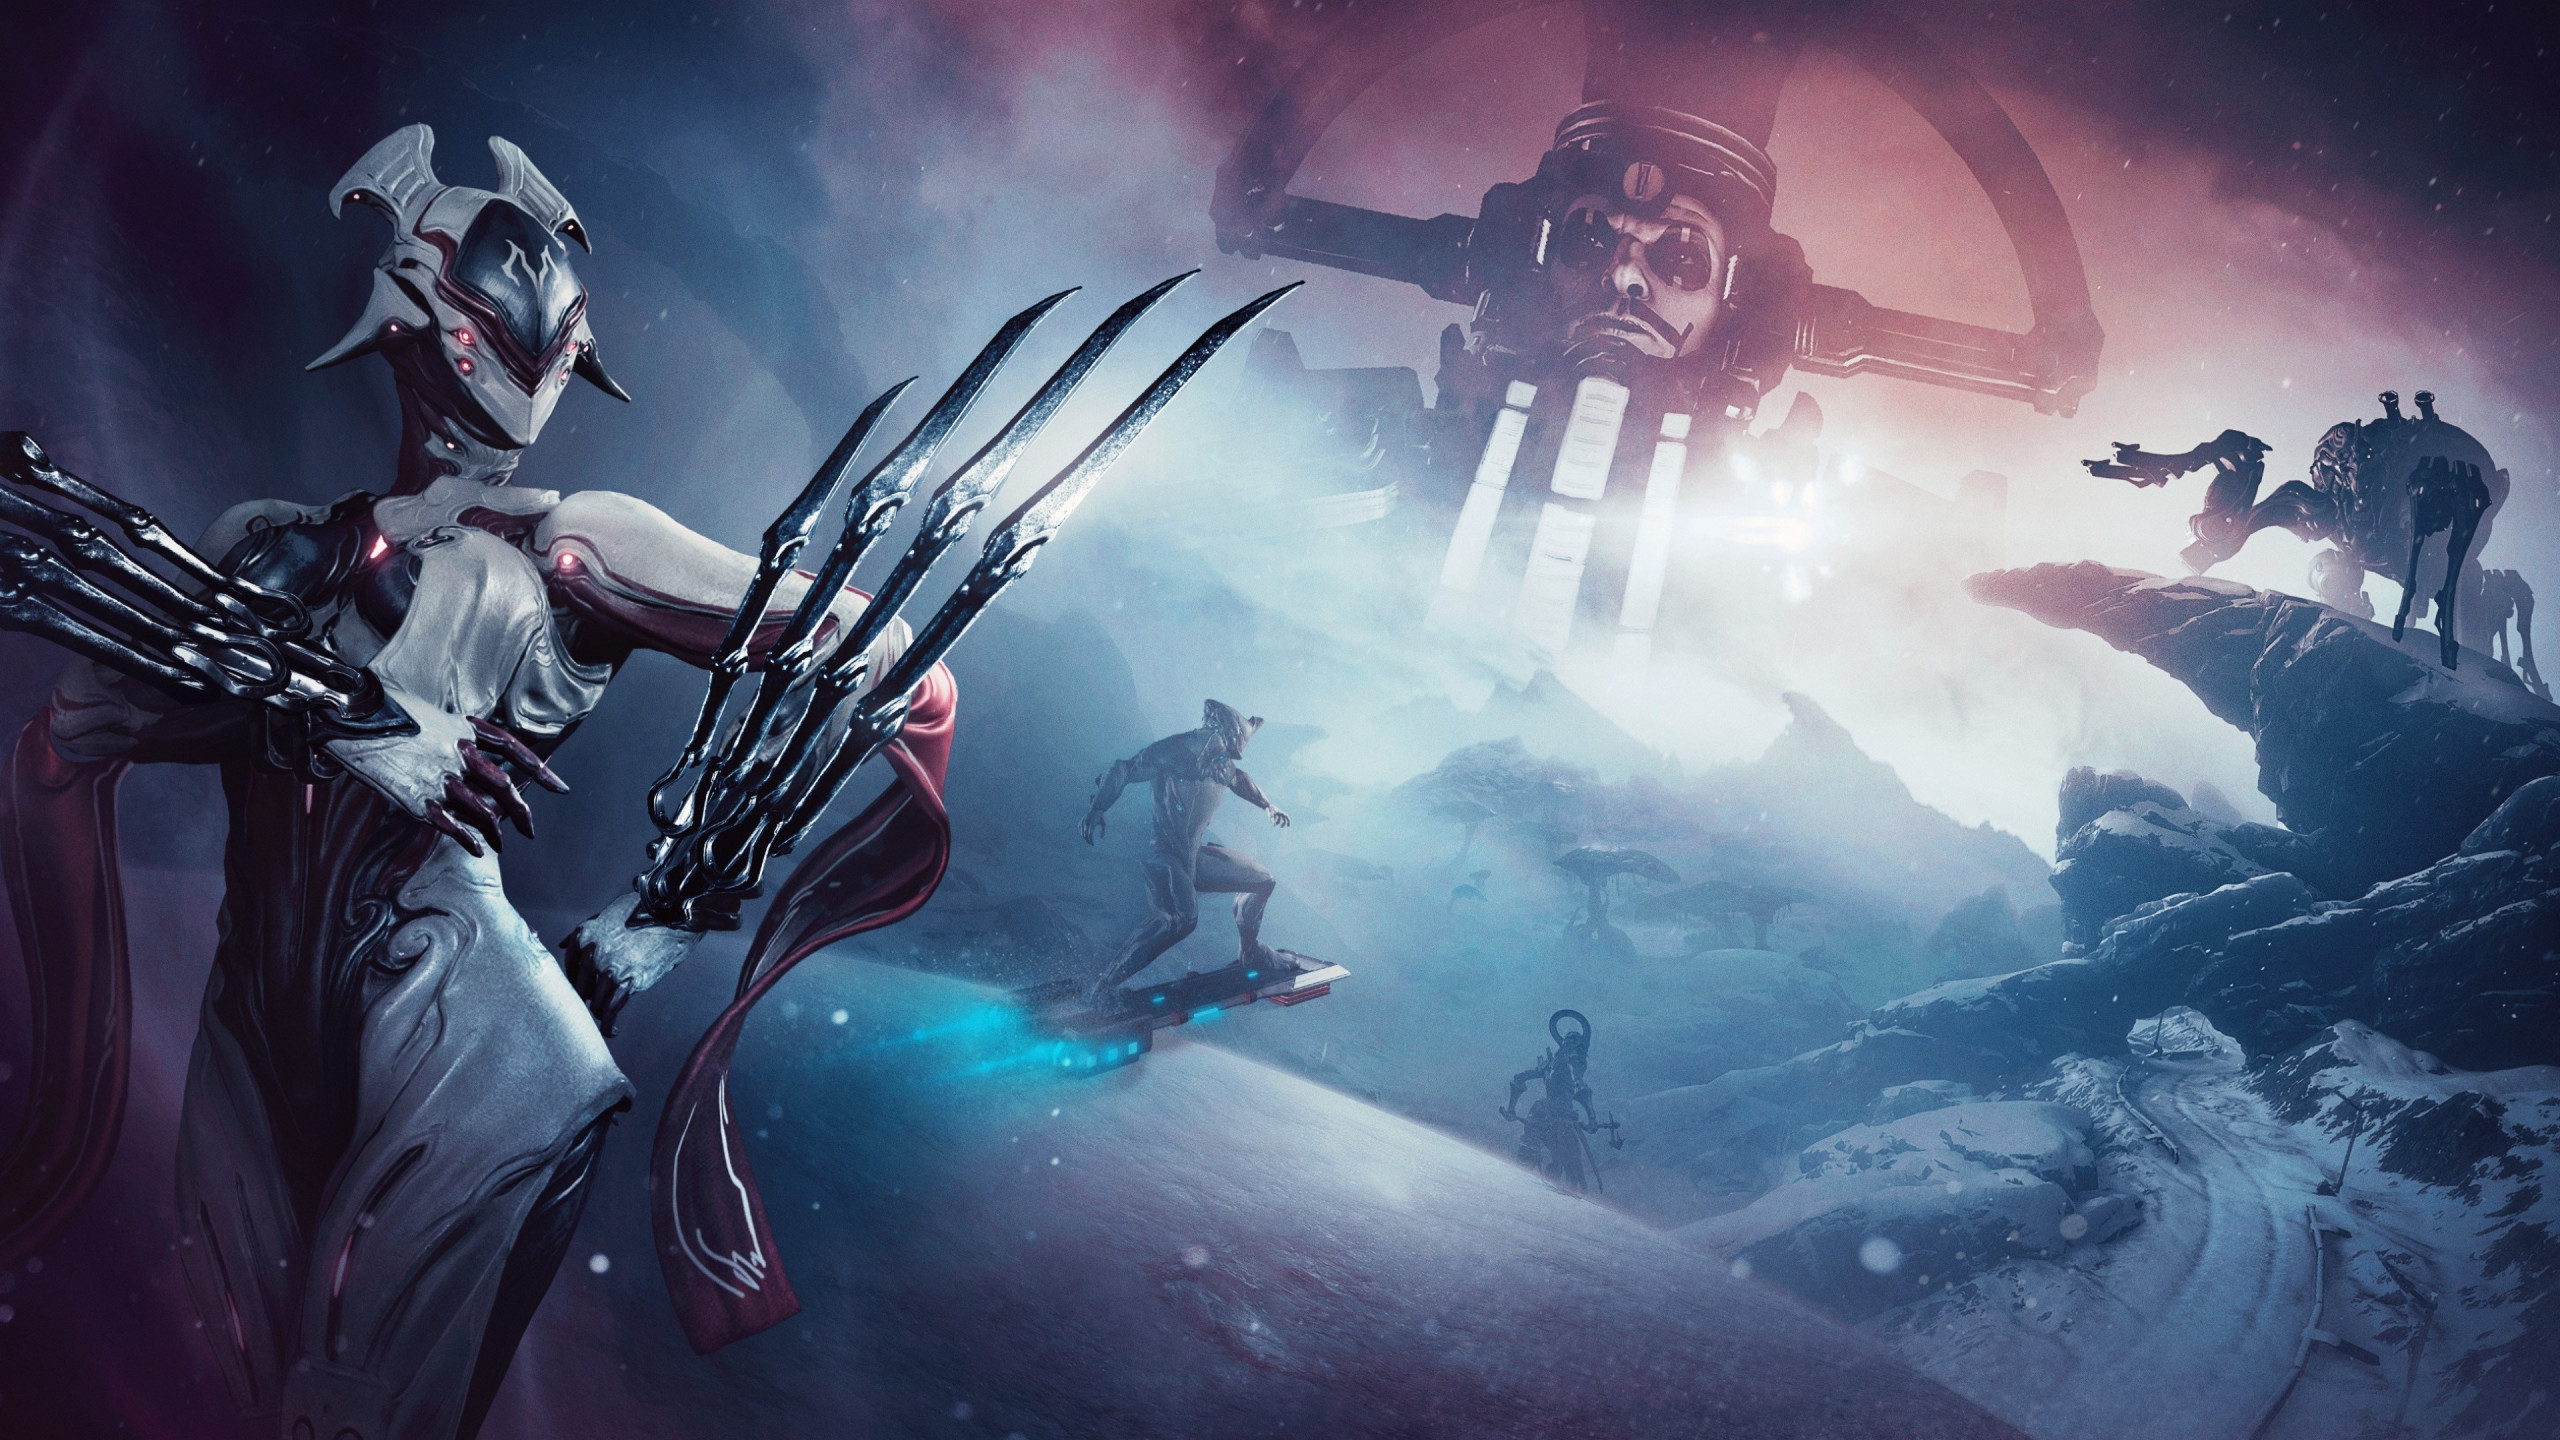 Download Wallpaper Fortuna Expensasion For Warframe Game 2560x1440